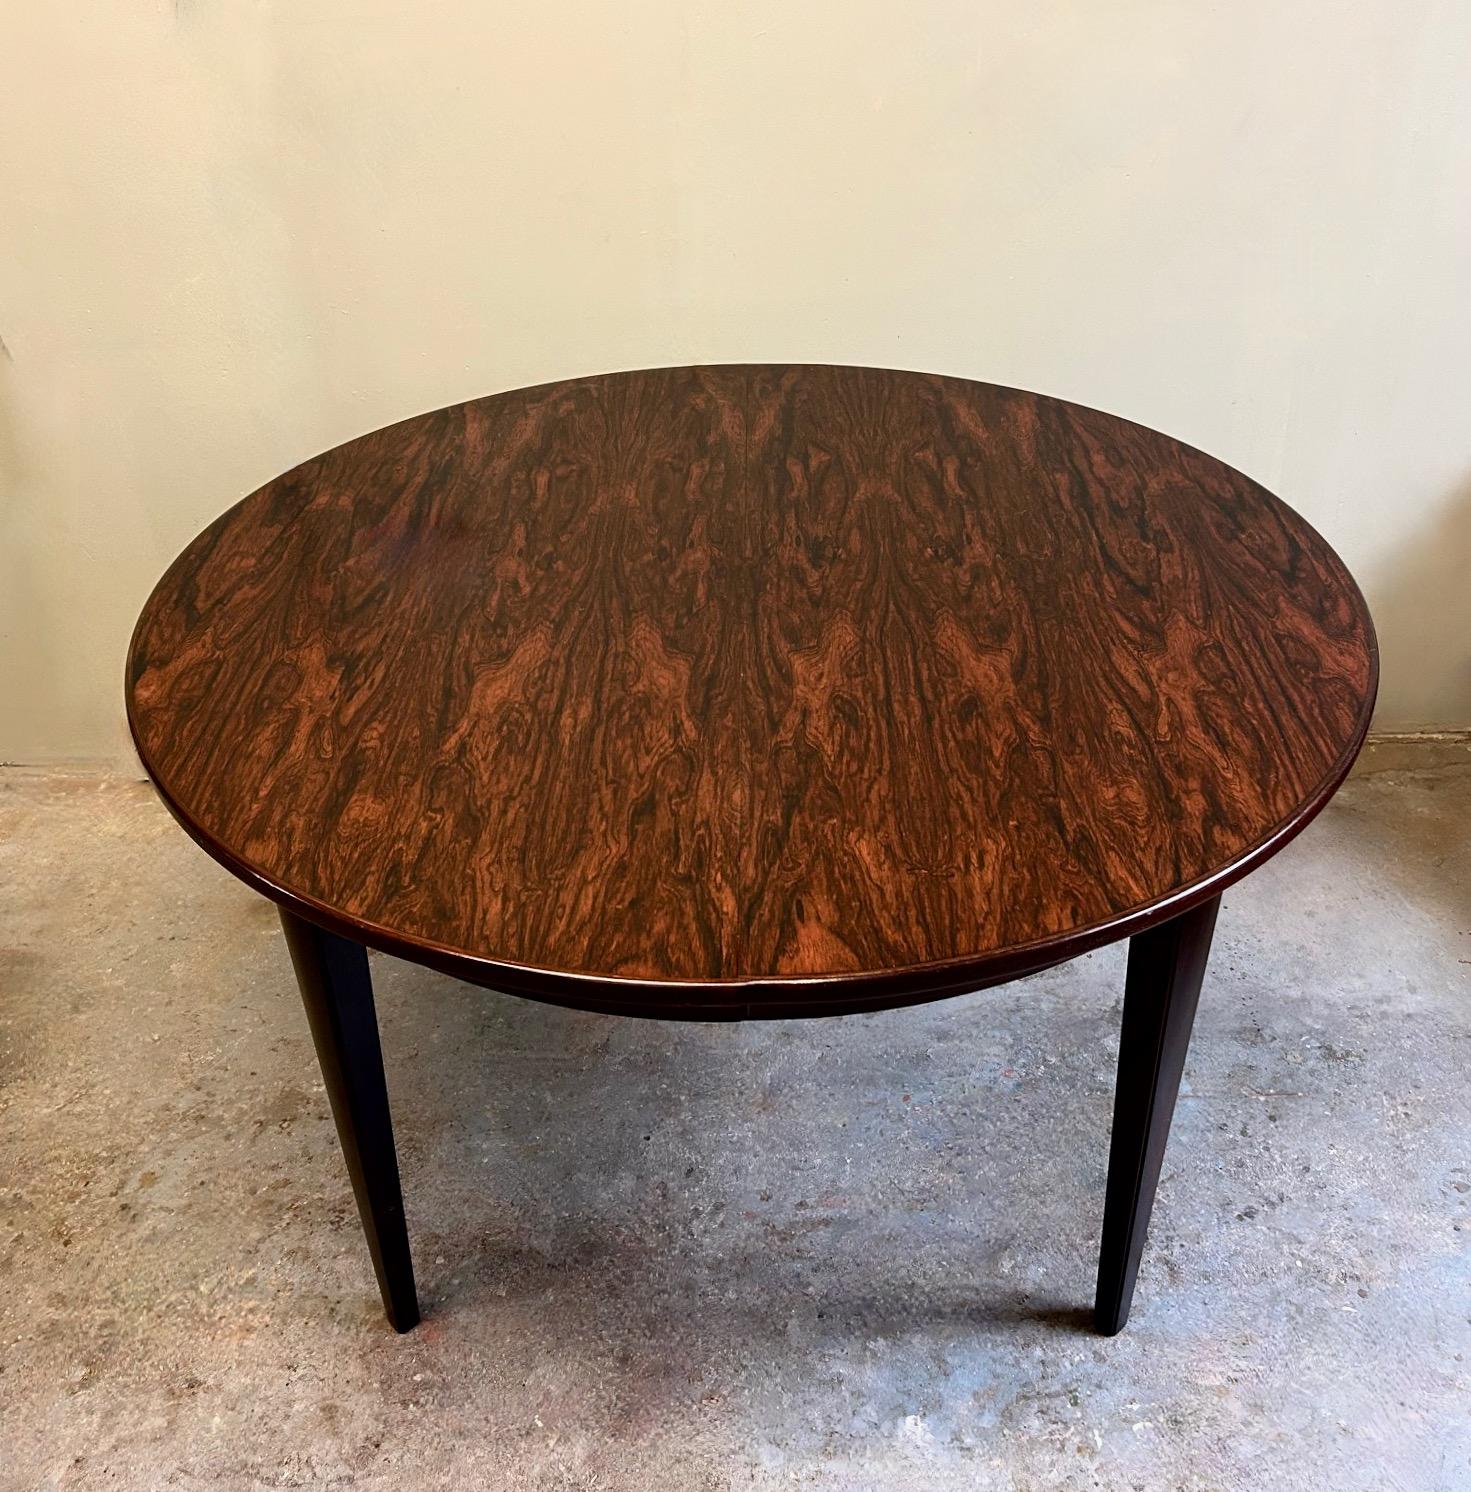 A beautiful Danish Model 55 rosewood dining table designed by Gunni Omann for Omann Jun Møbelfabrik, this would make a stylish addition to any dining or work area. A striking piece of classically designed Scandinavian furniture.

The table has a